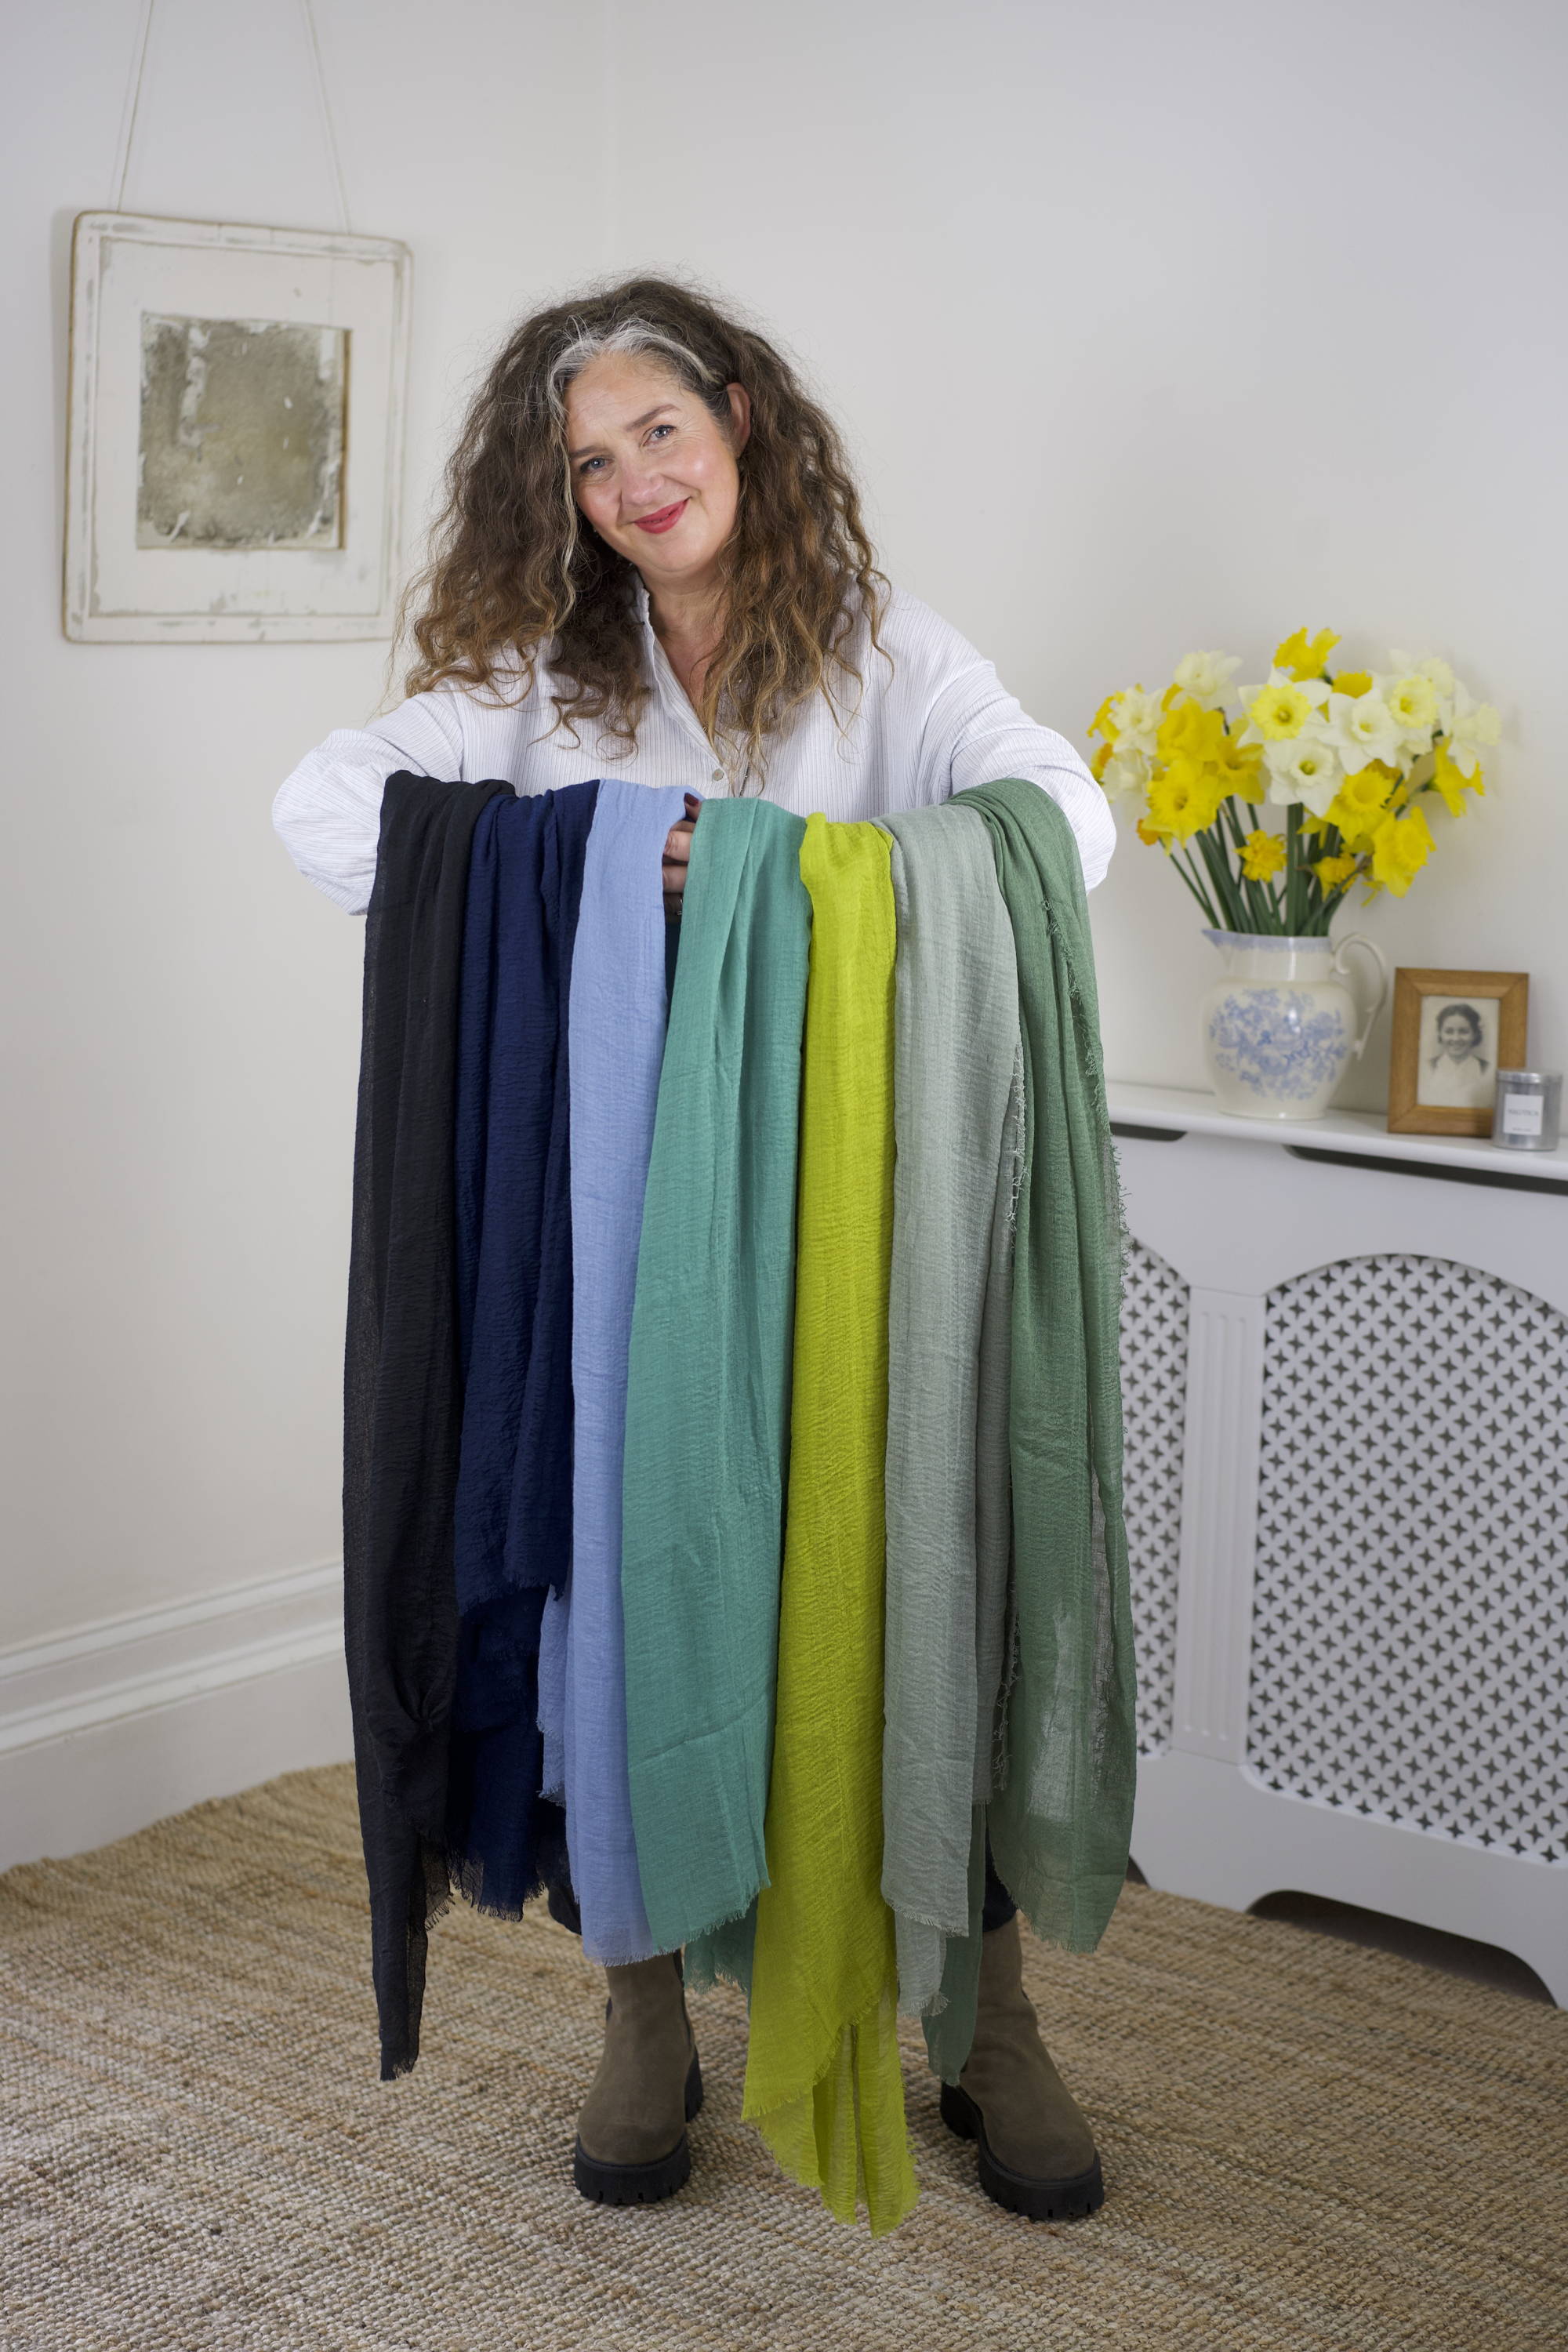 Emma Vowles holding an array of different coloured scarves